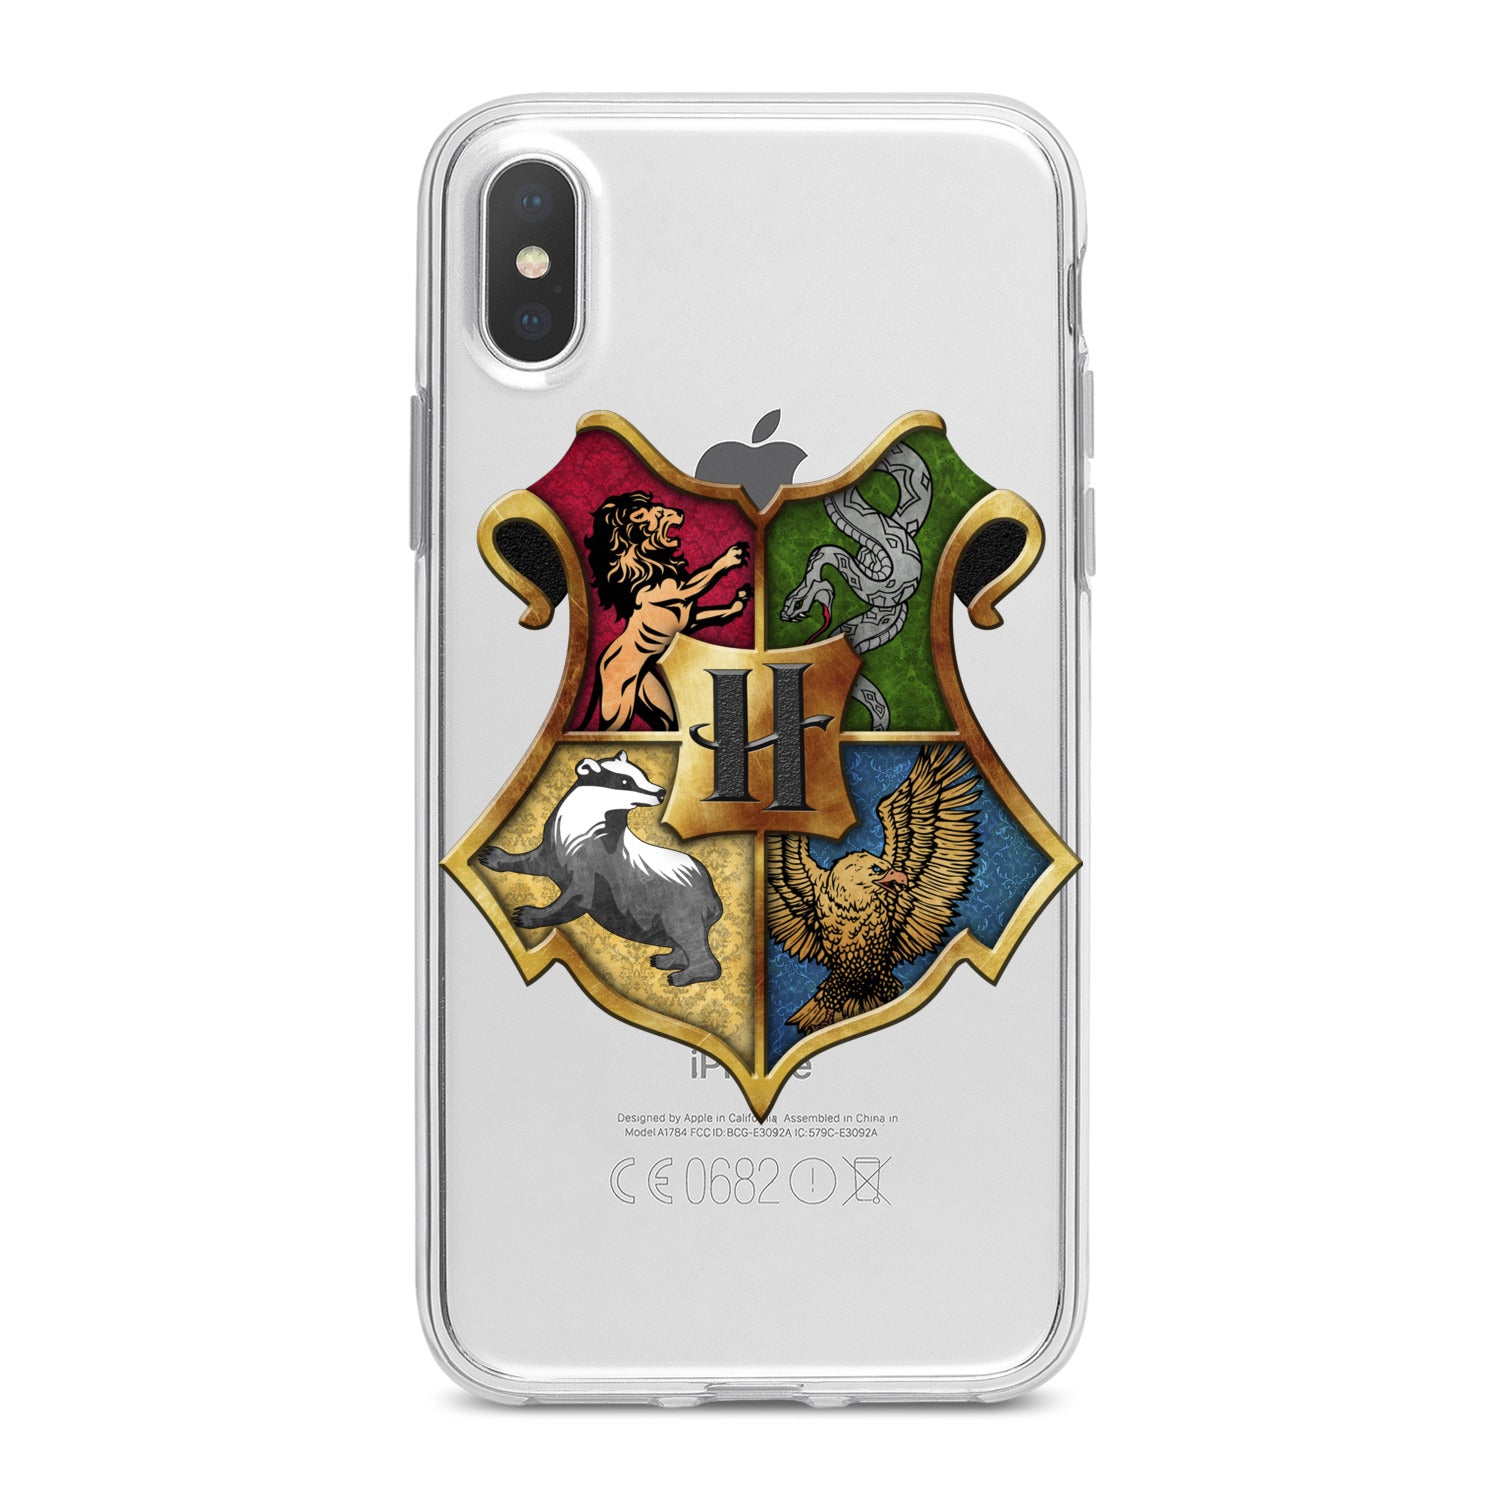 Lex Altern Hogwarts Symbol Phone Case for your iPhone & Android phone.